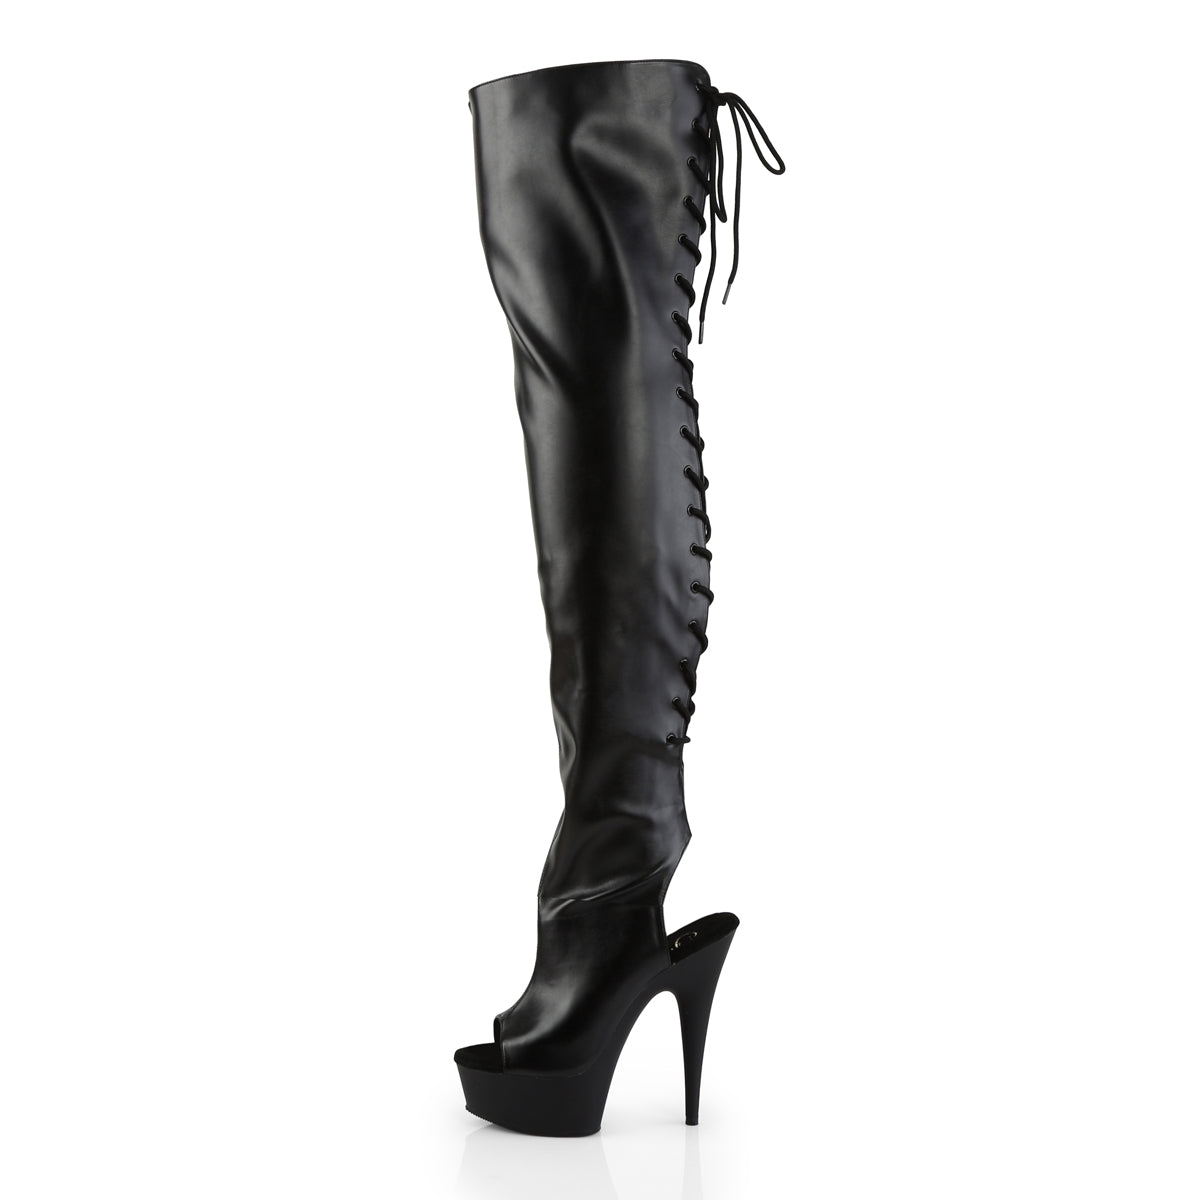 DELIGHT-3017 Black Thigh High Boots  Multi view 4